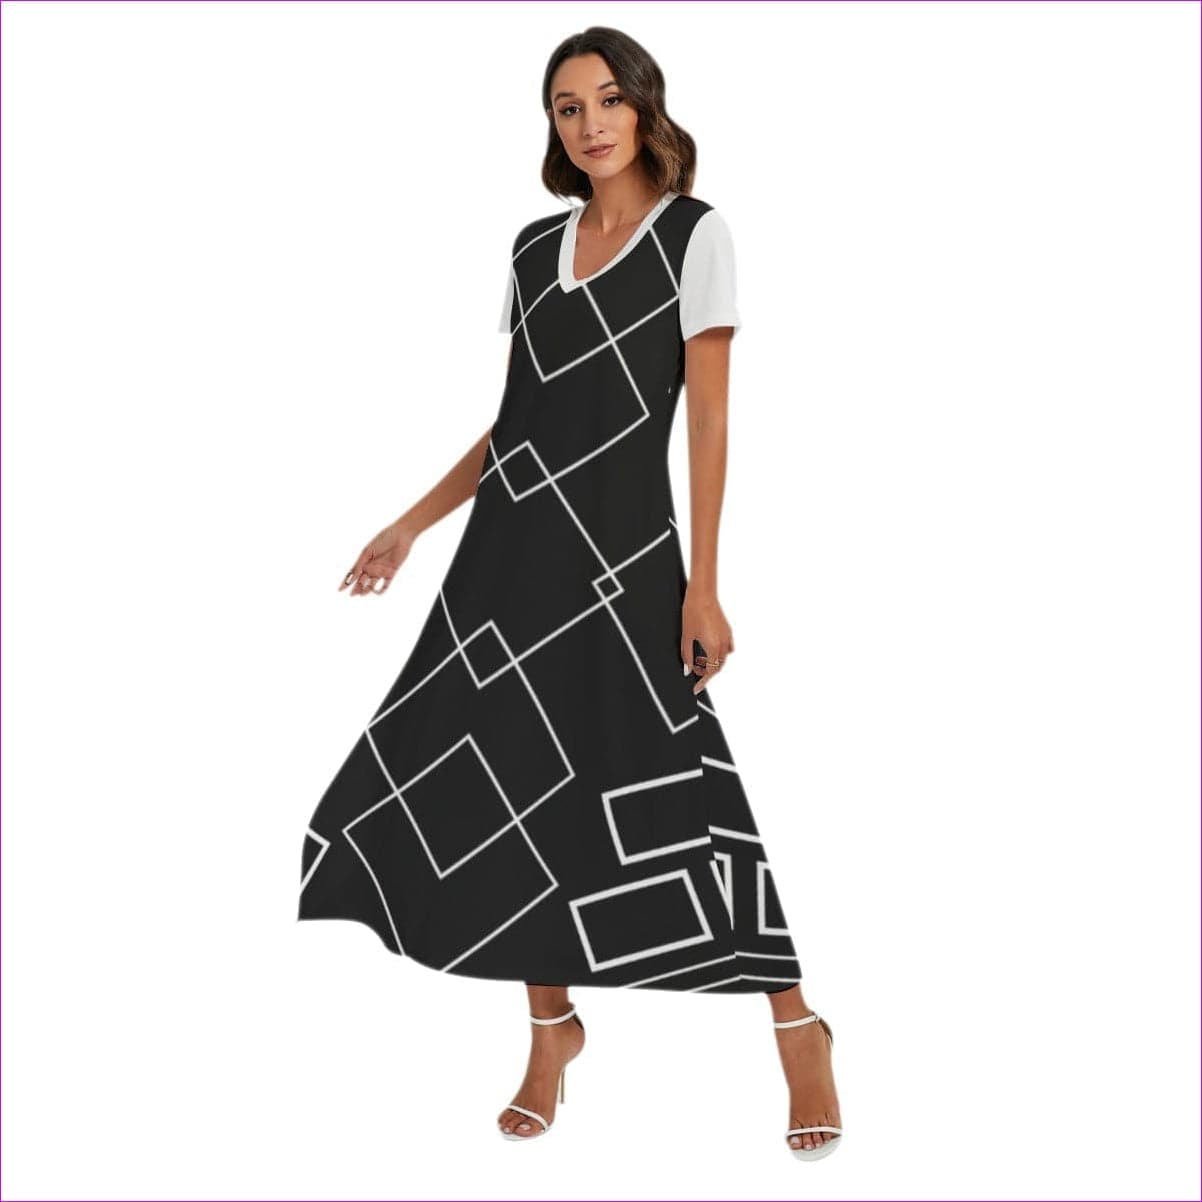 Black Shaped Out Women's V-neck Dress With Short Sleeve - women's dress at TFC&H Co.